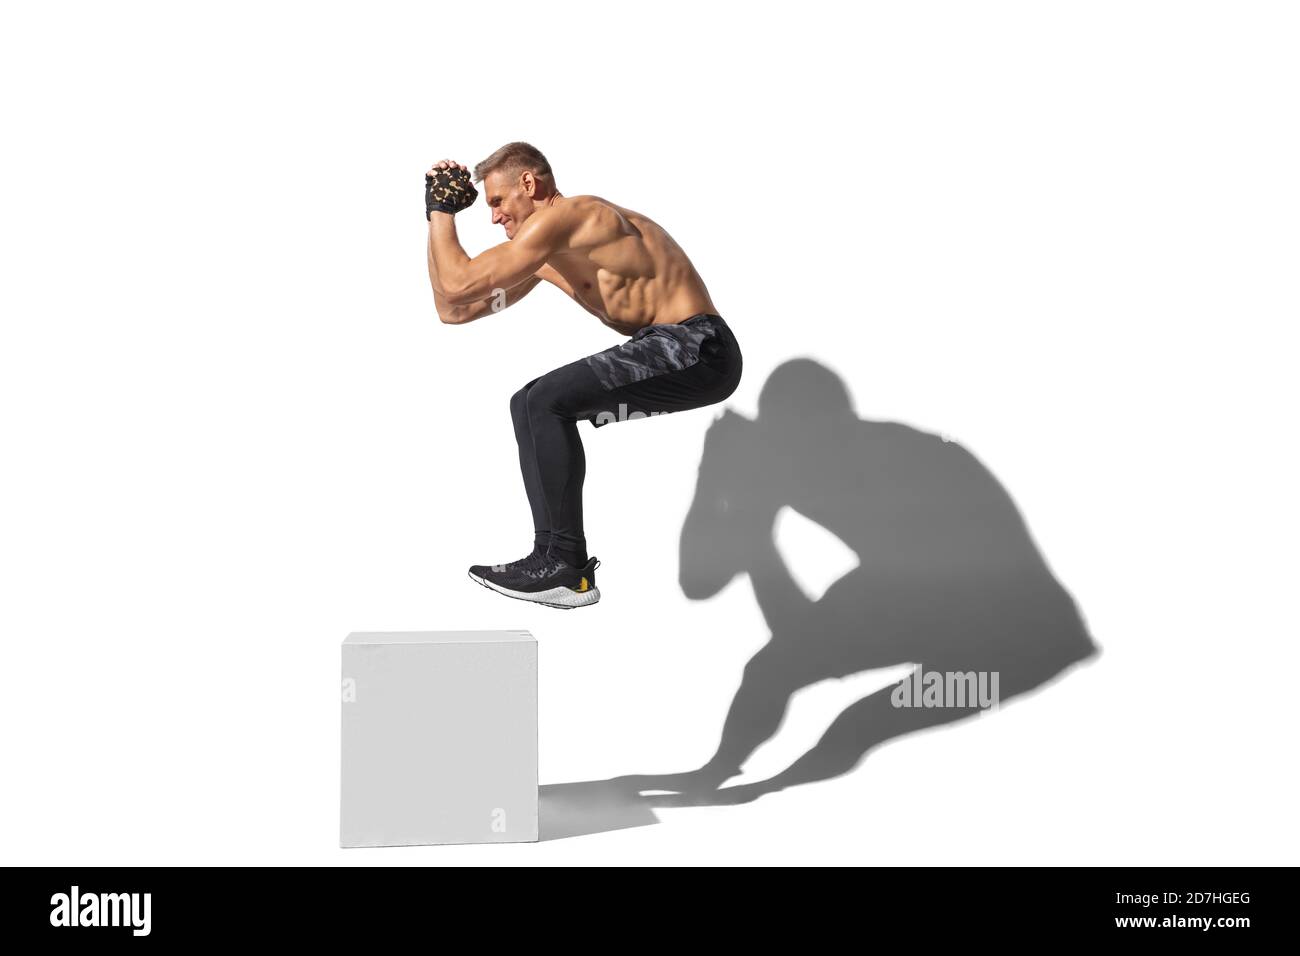 Activity, jumpbox. Stylish young male athlete on white studio background, portrait with shadows. Sportive fit model in motion and action. Body building, healthy lifestyle, style concept. Stock Photo